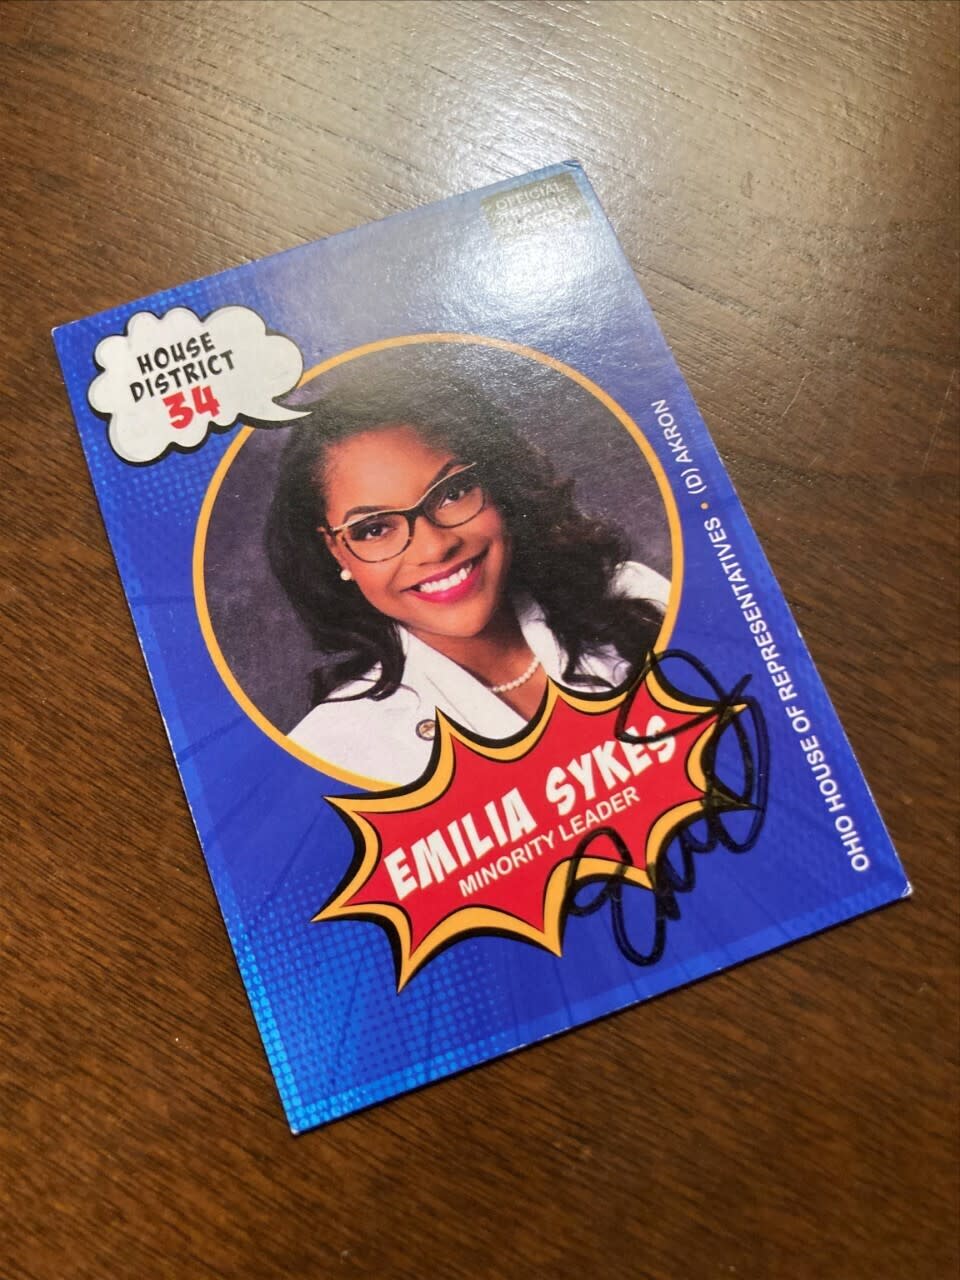 A trading card of Ohio House Minority Leader Emilia Sykes is photographed at Ohio House legislative aide Adam Headlee's office in the Riffe Center in Columbus, Ohio, on Friday, Dec. 17, 2021. Sykes, an Akron Democrat, was the final state representative to provide her autograph to complete Headlee’s collection of signed trading cards. Headlee said the good humor with which both Republicans and Democrats greeted his project sends “a subtle message of unity” at a politically divided time. (AP Photo/Julie Carr Smyth)